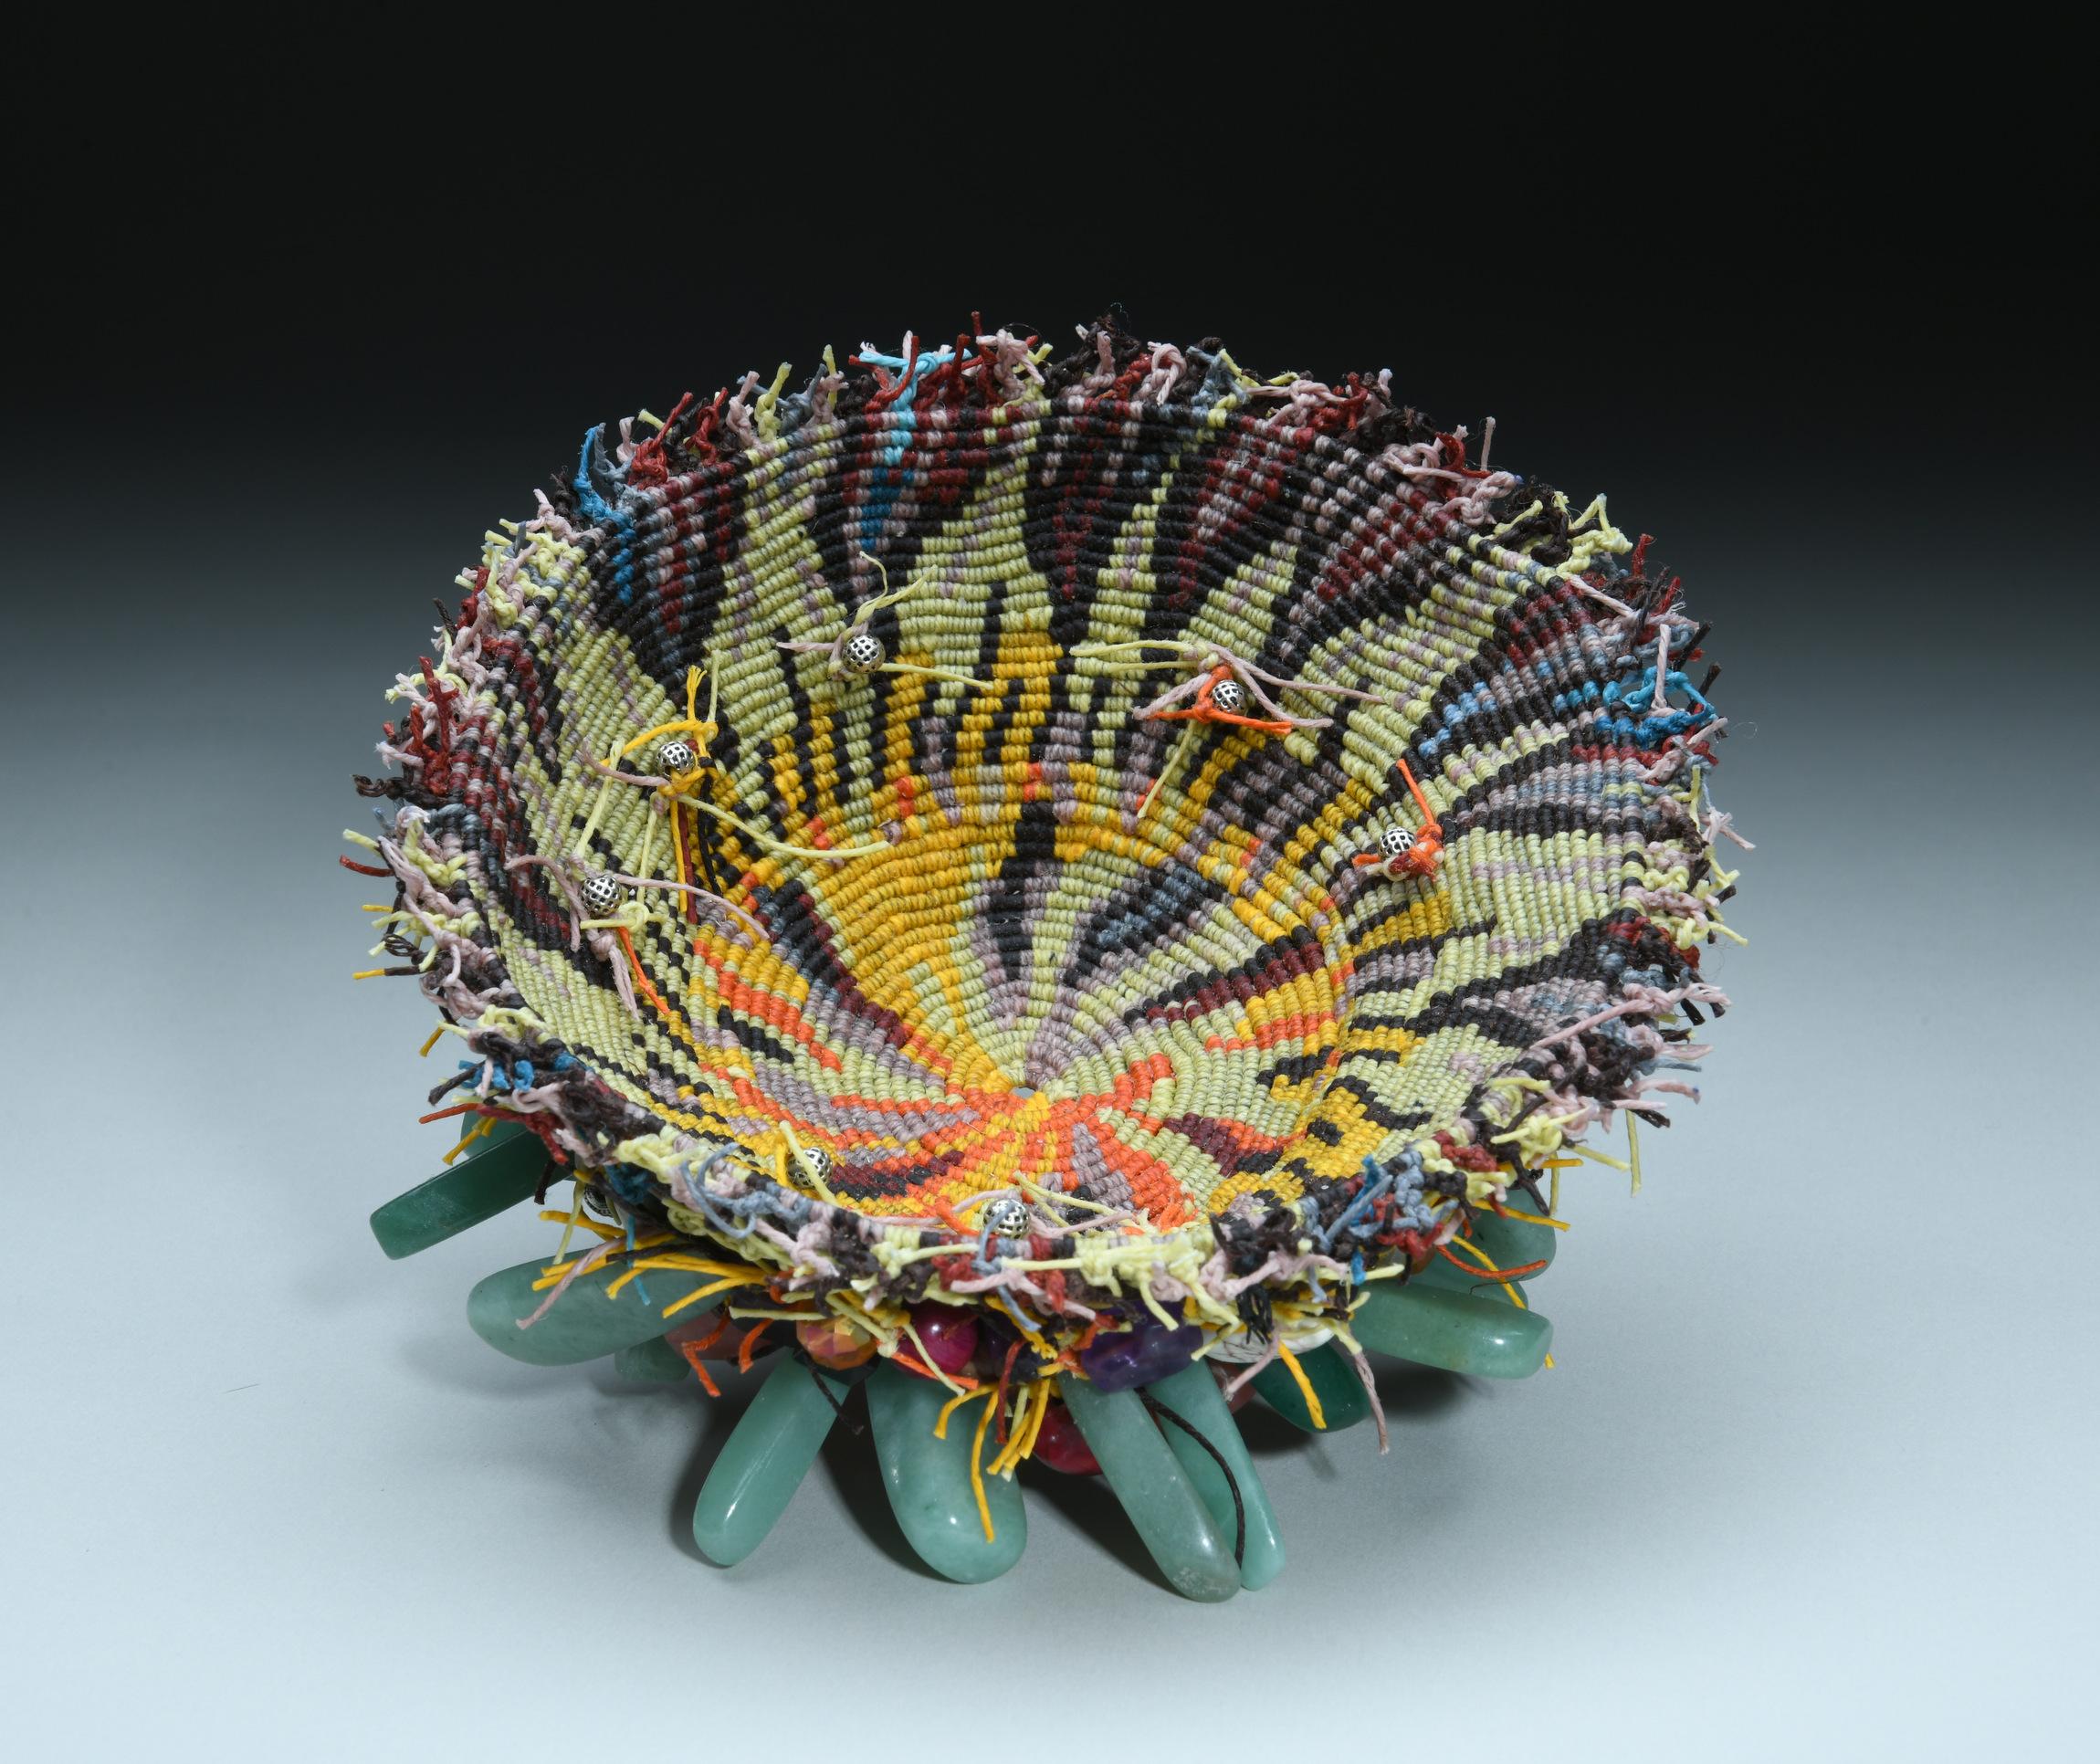 Sun Smith-Forêt Abstract Sculpture - "Bowl with Jade Bottom", Contemporary Mixed Media Textile Sculpture with Stones